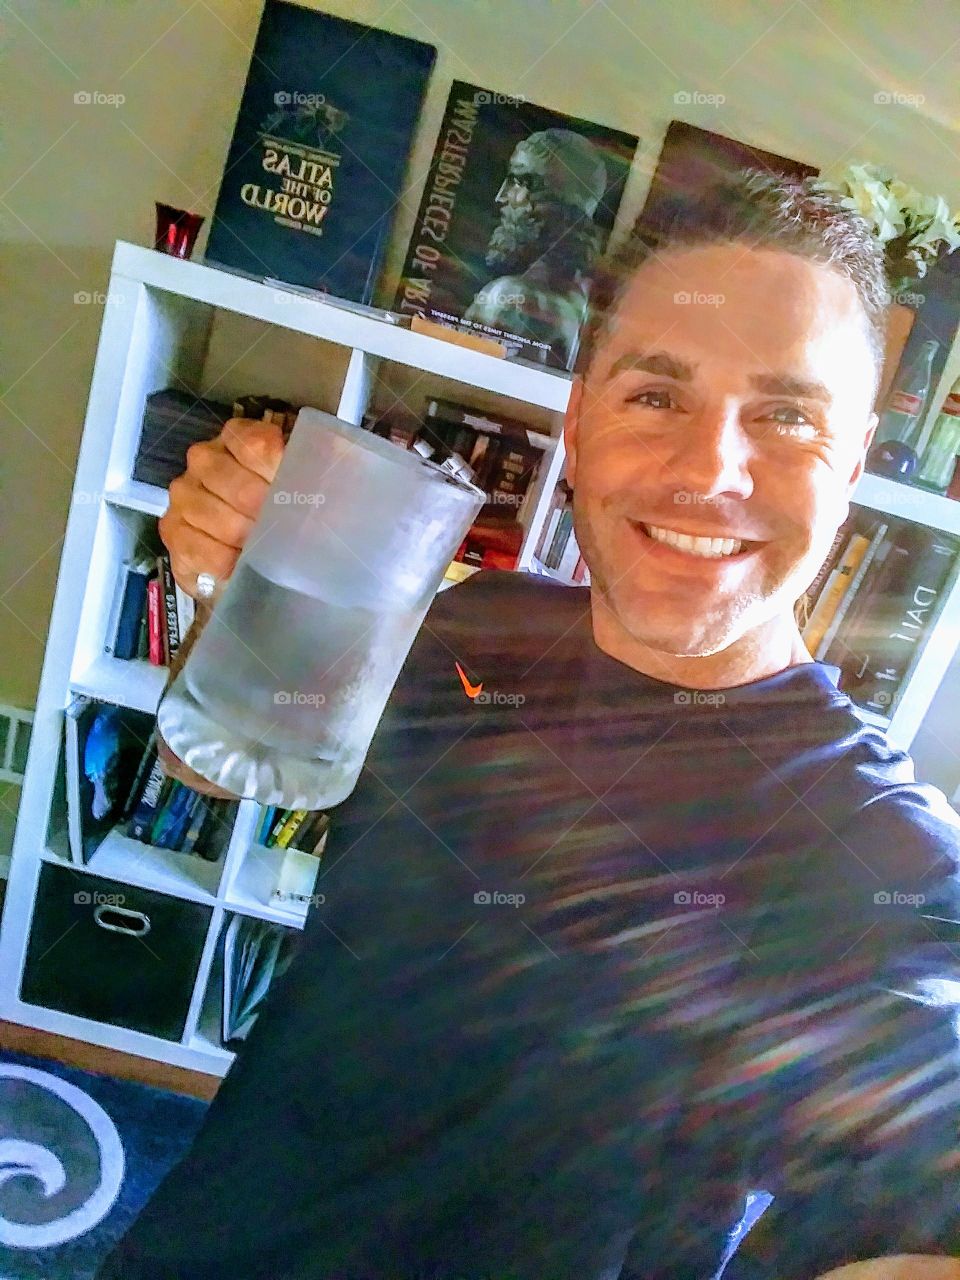 This is me celebrating 5 years 6 months and 7 days of sobriety from alcohol. when the only thing you have in an iced mug on a Saturday night is water...life's good. I also love my book collection behind me.